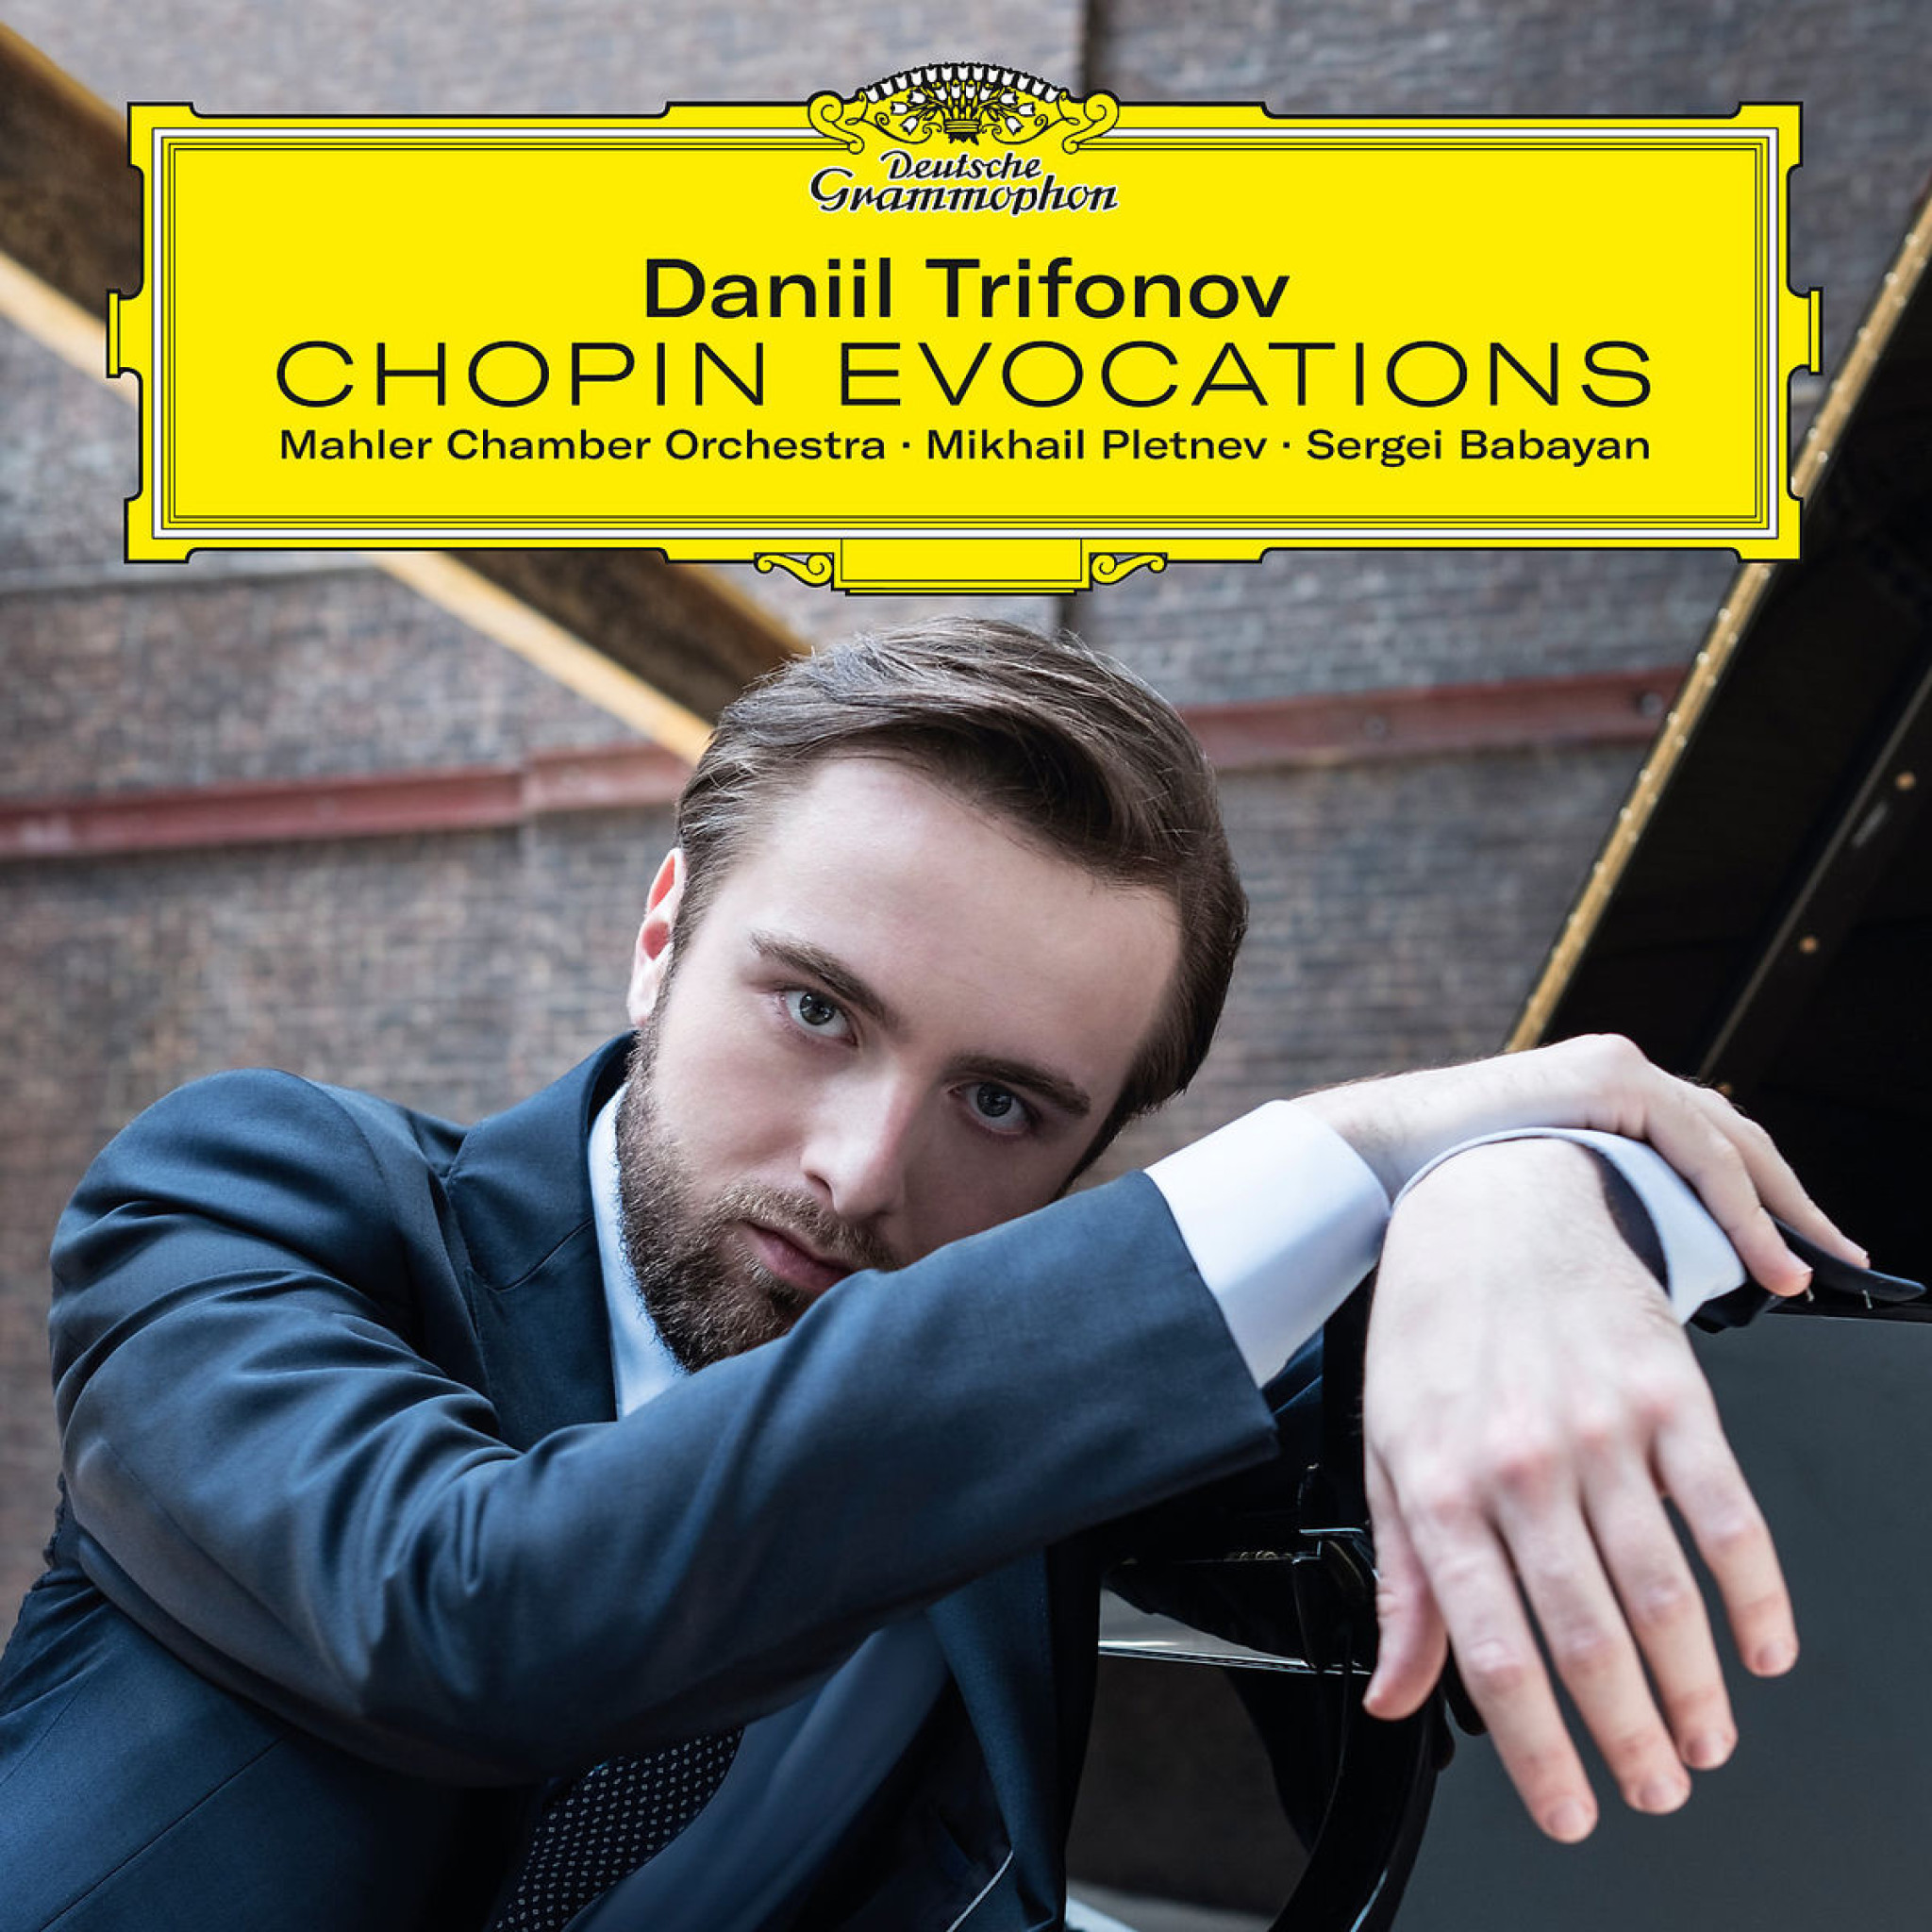 Chopin Evocations